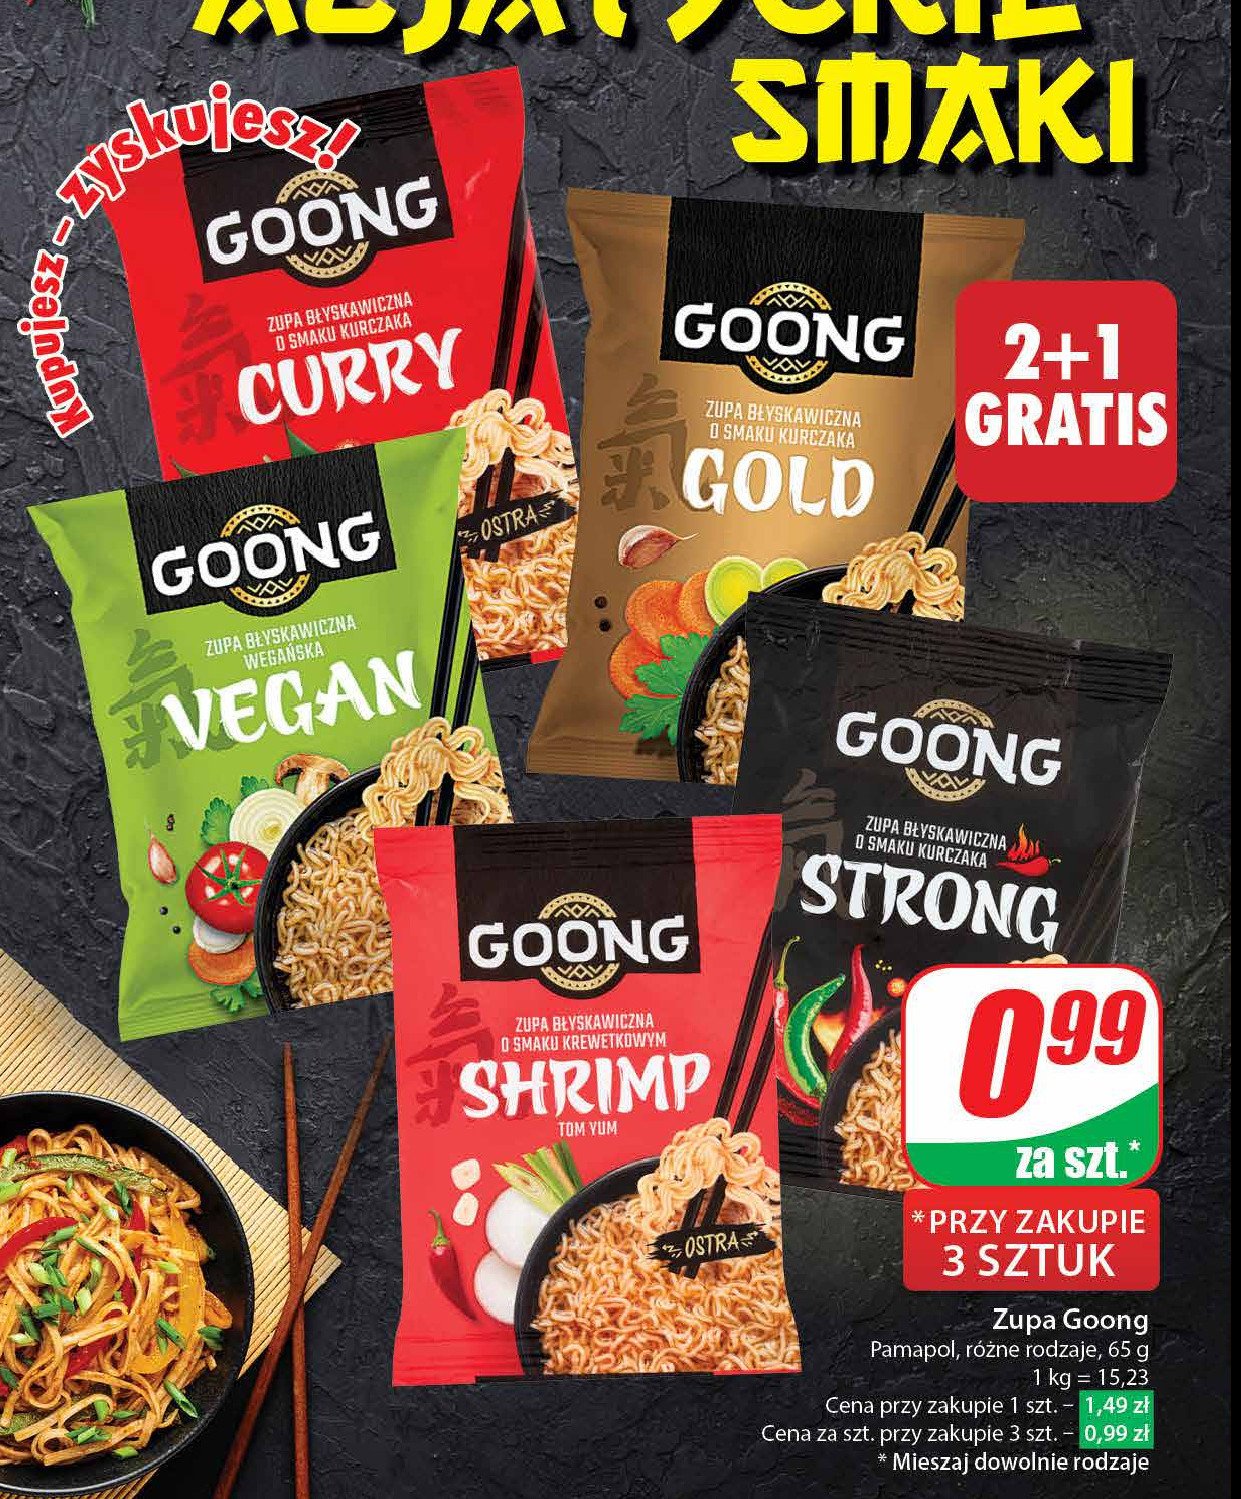 Zupa strong Goong promocja